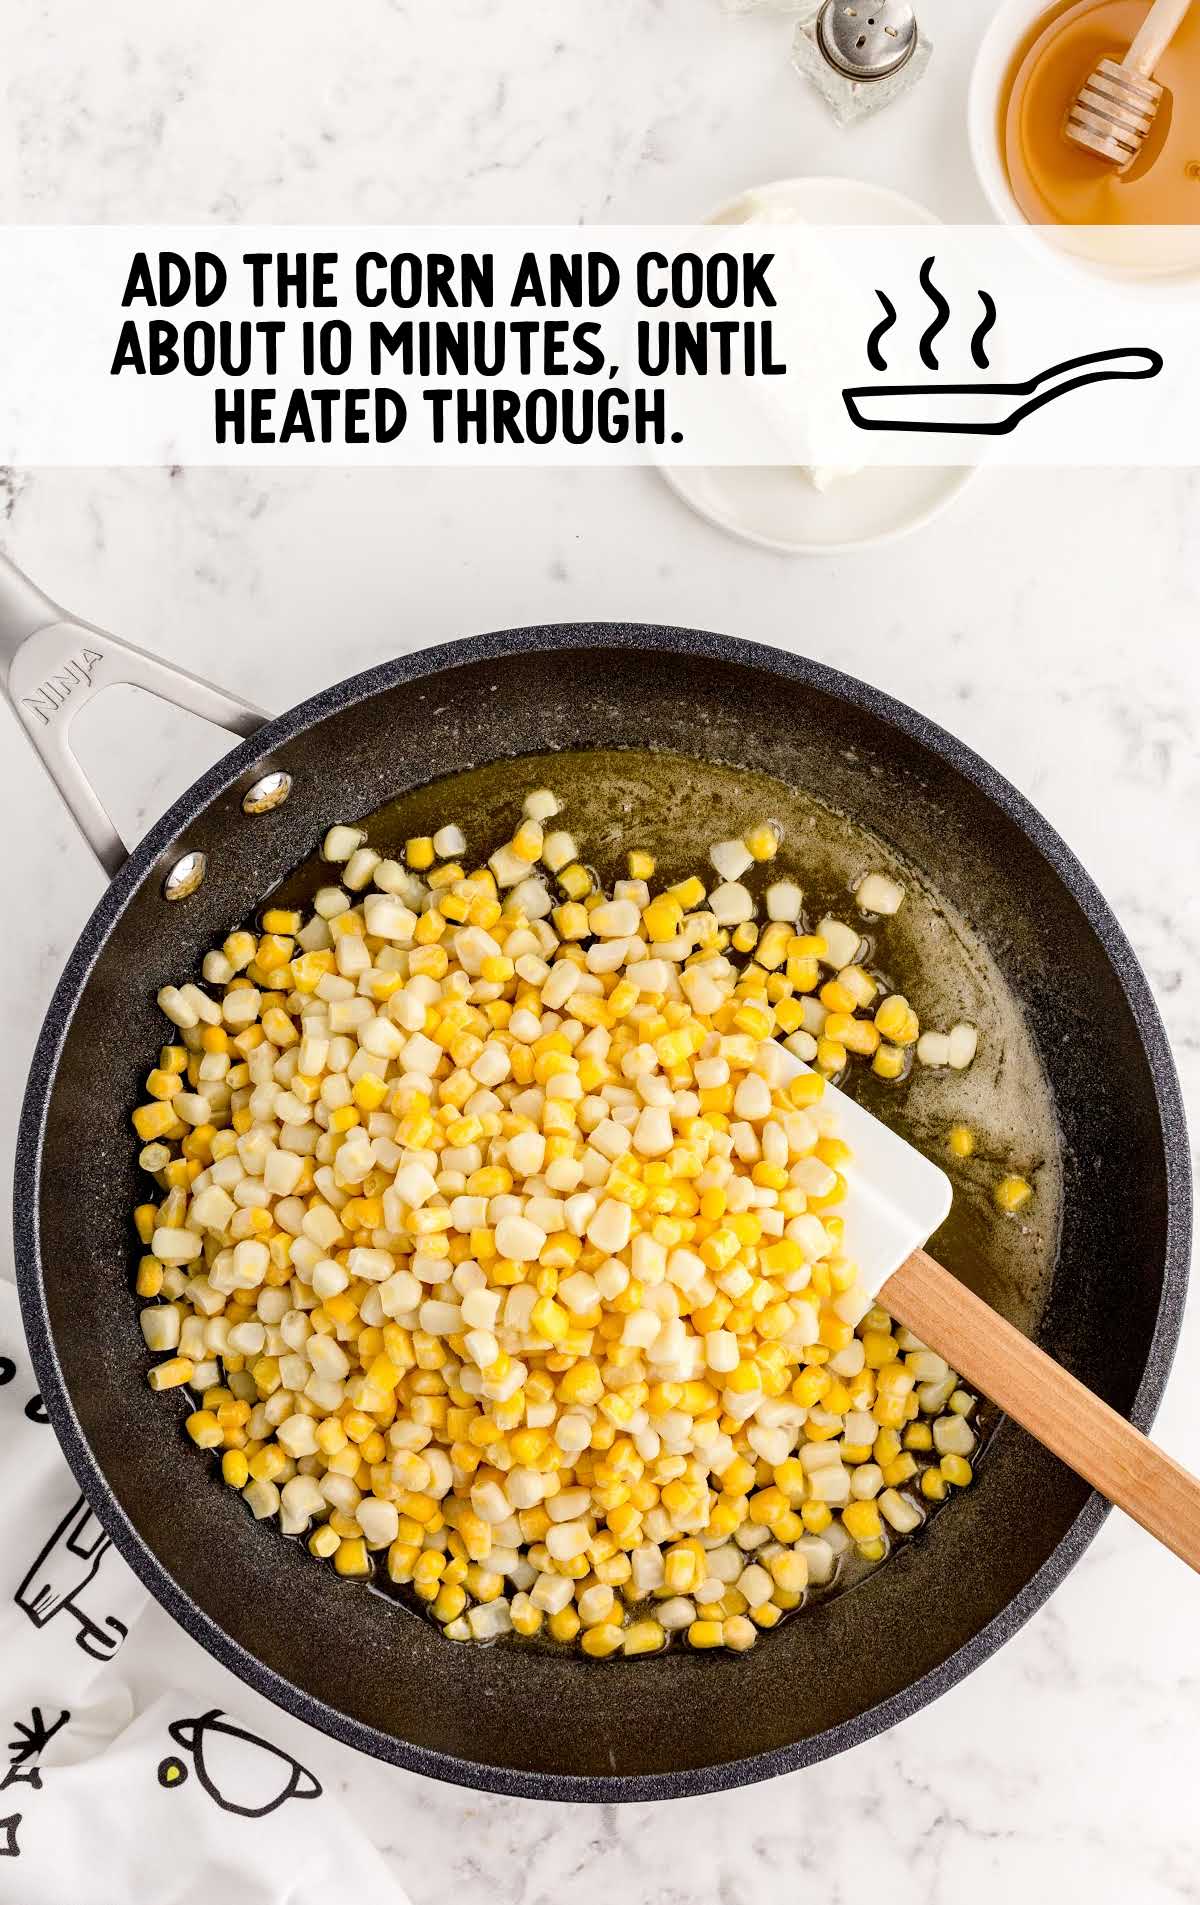 corn added to the honey and butter in the skillet